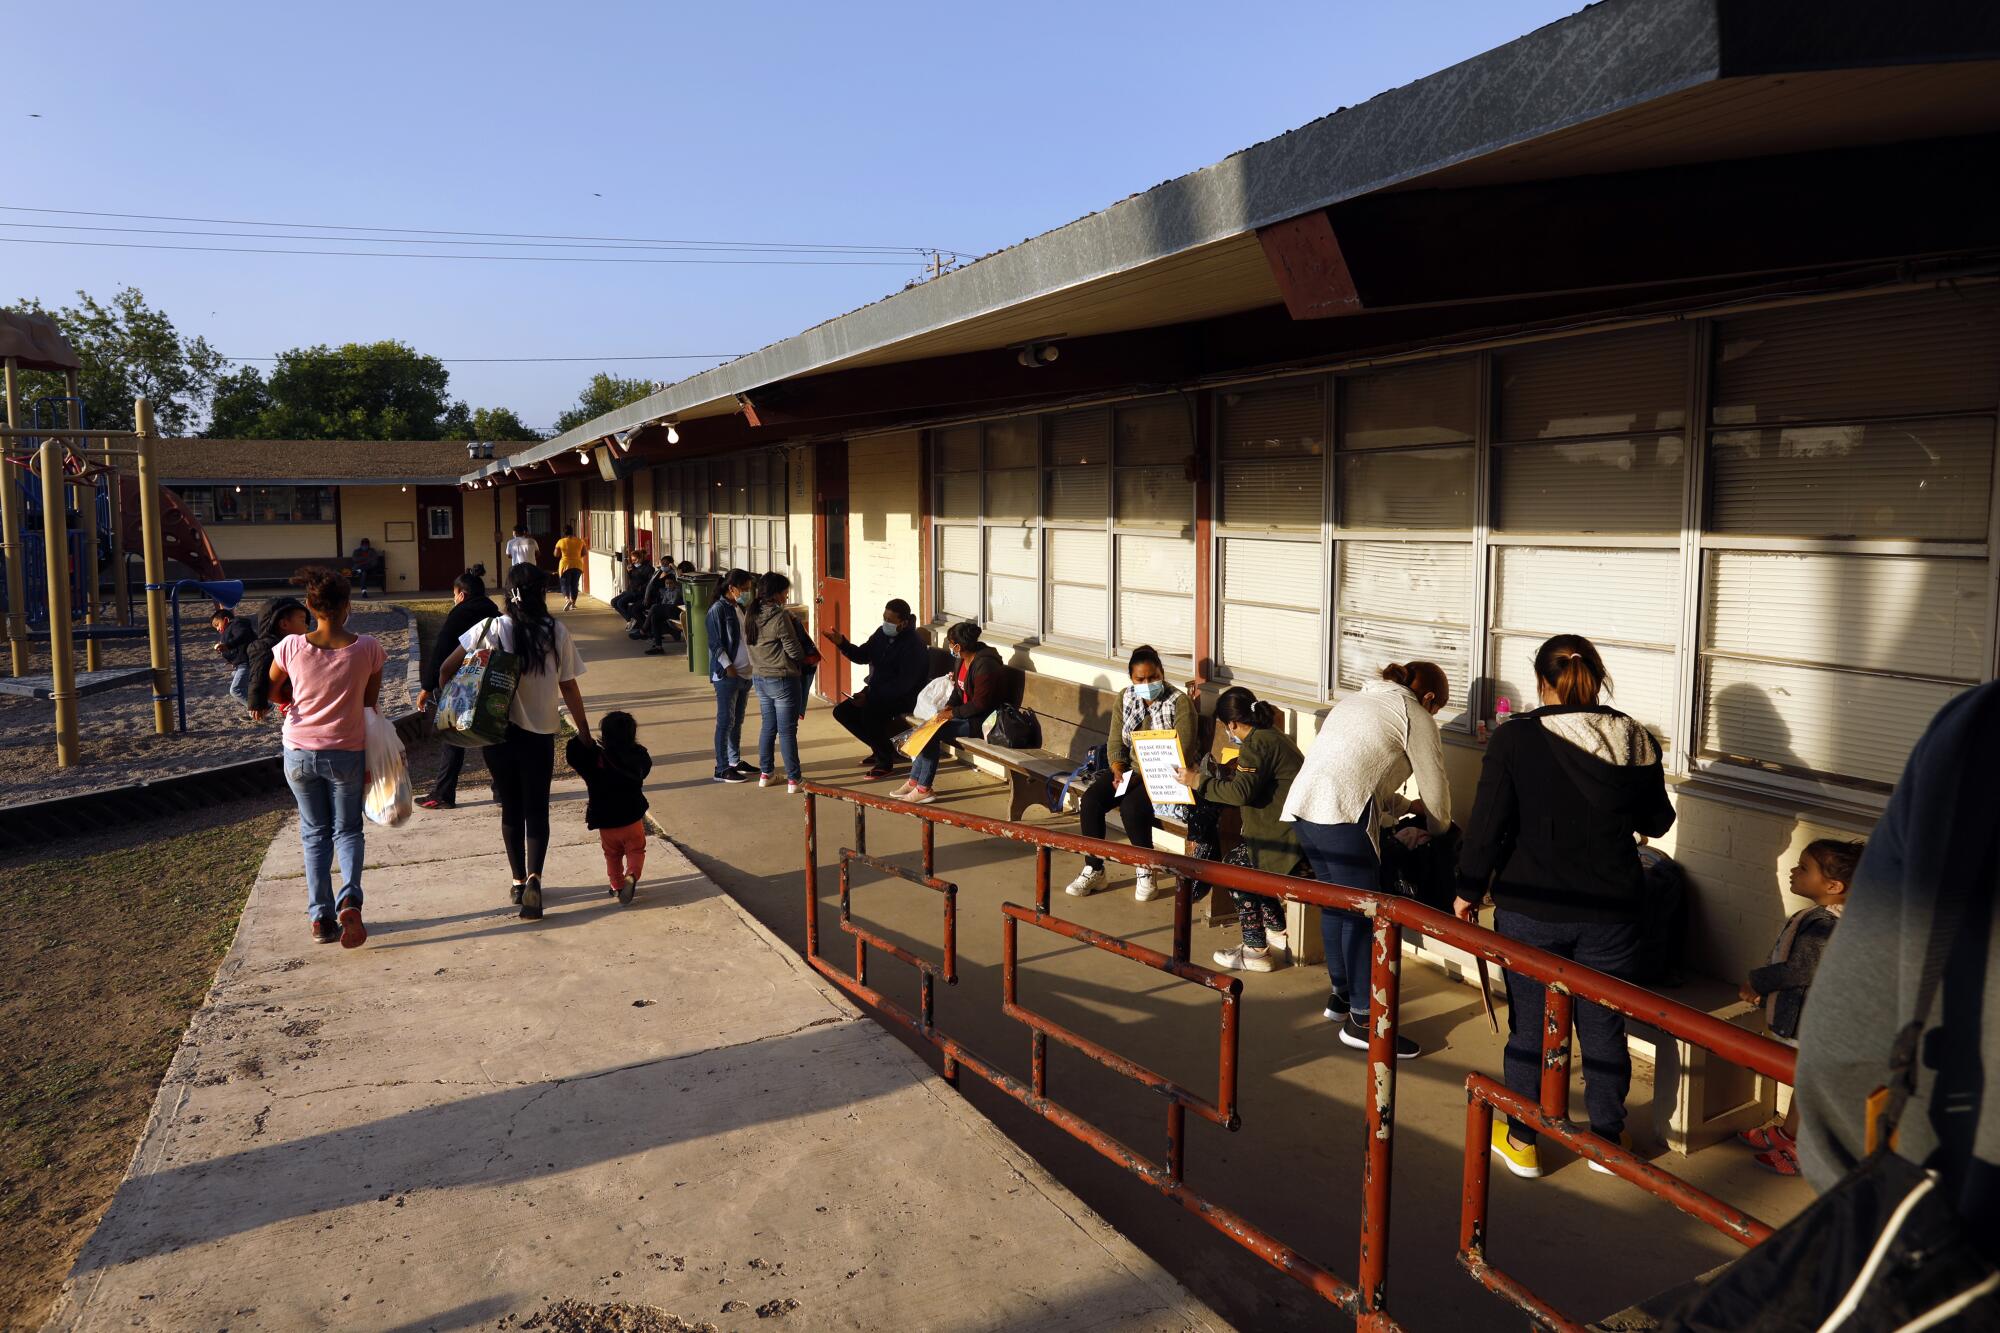 Hondurans and Guatemalans who crossed the U.S. border illegally spend time temporarily at a shelter in Mission, Texas.